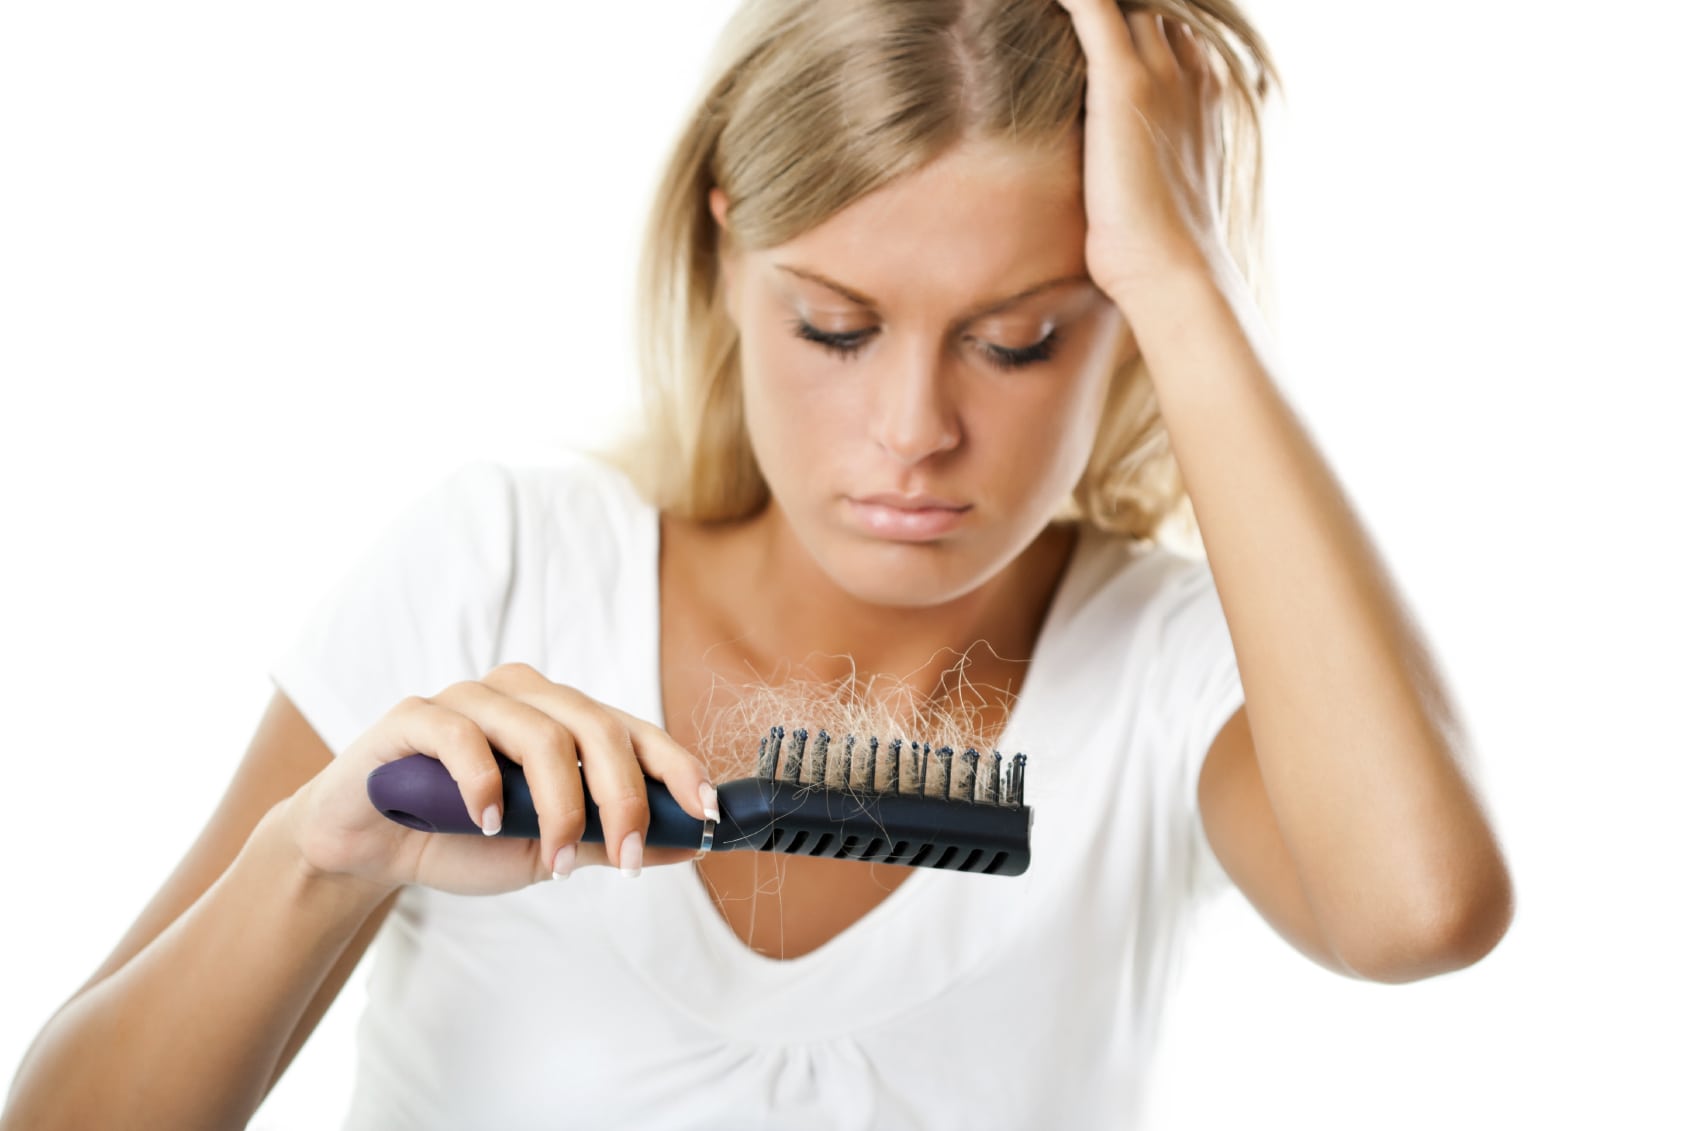 15 reasons why females suffer from hair loss or thinning